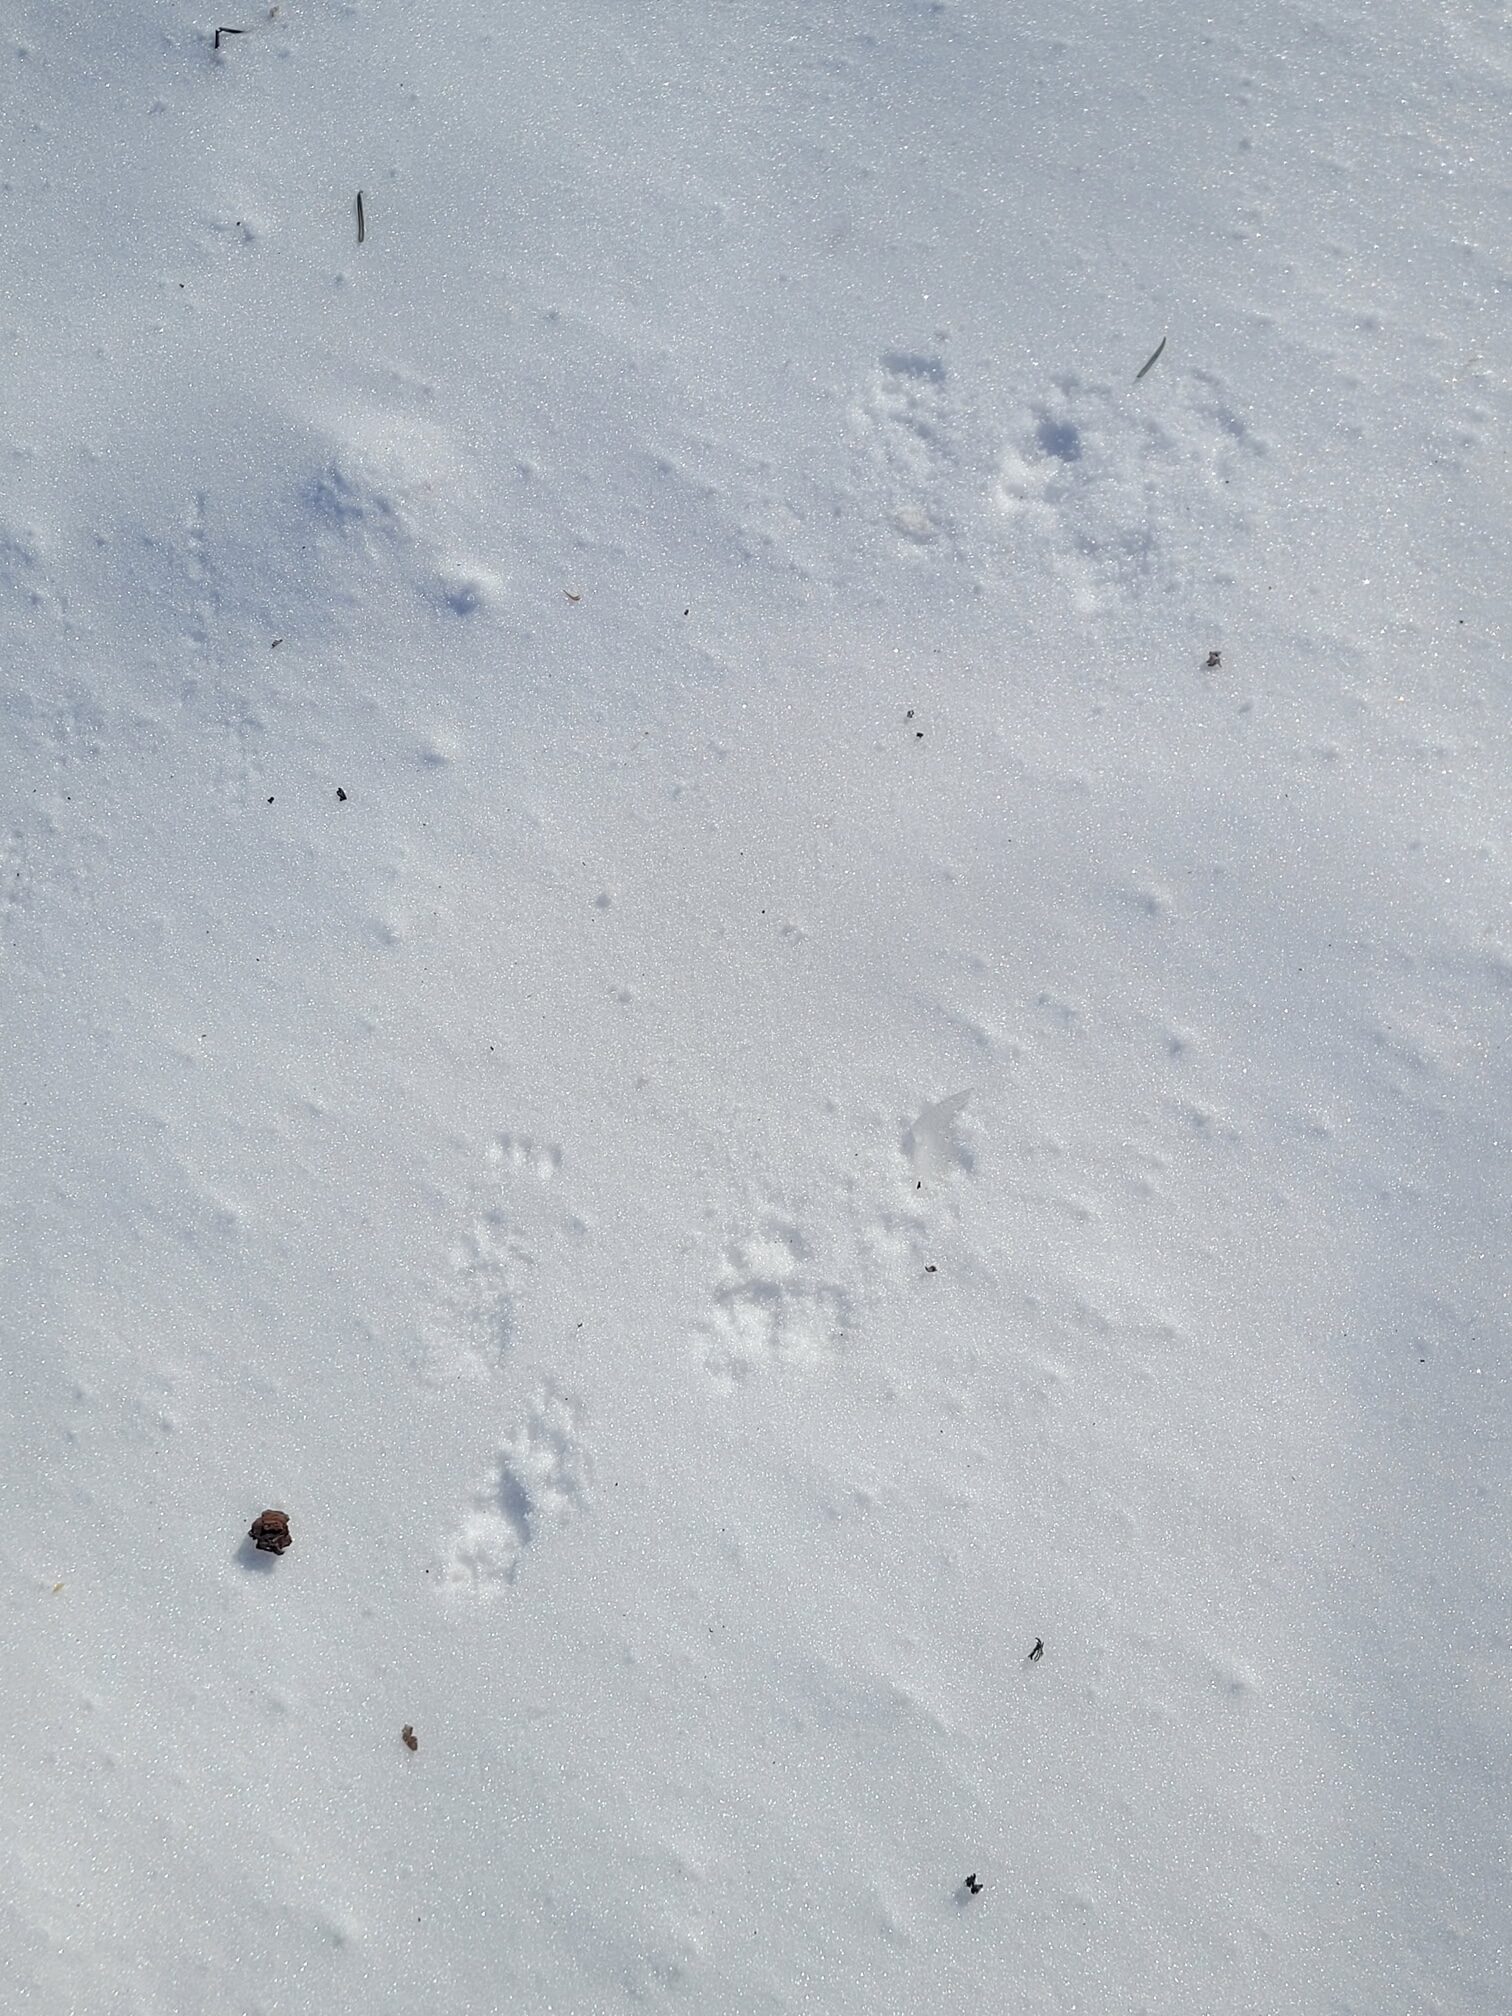 Small mammal tracks in stark white snow. Best guess is Least Weasel